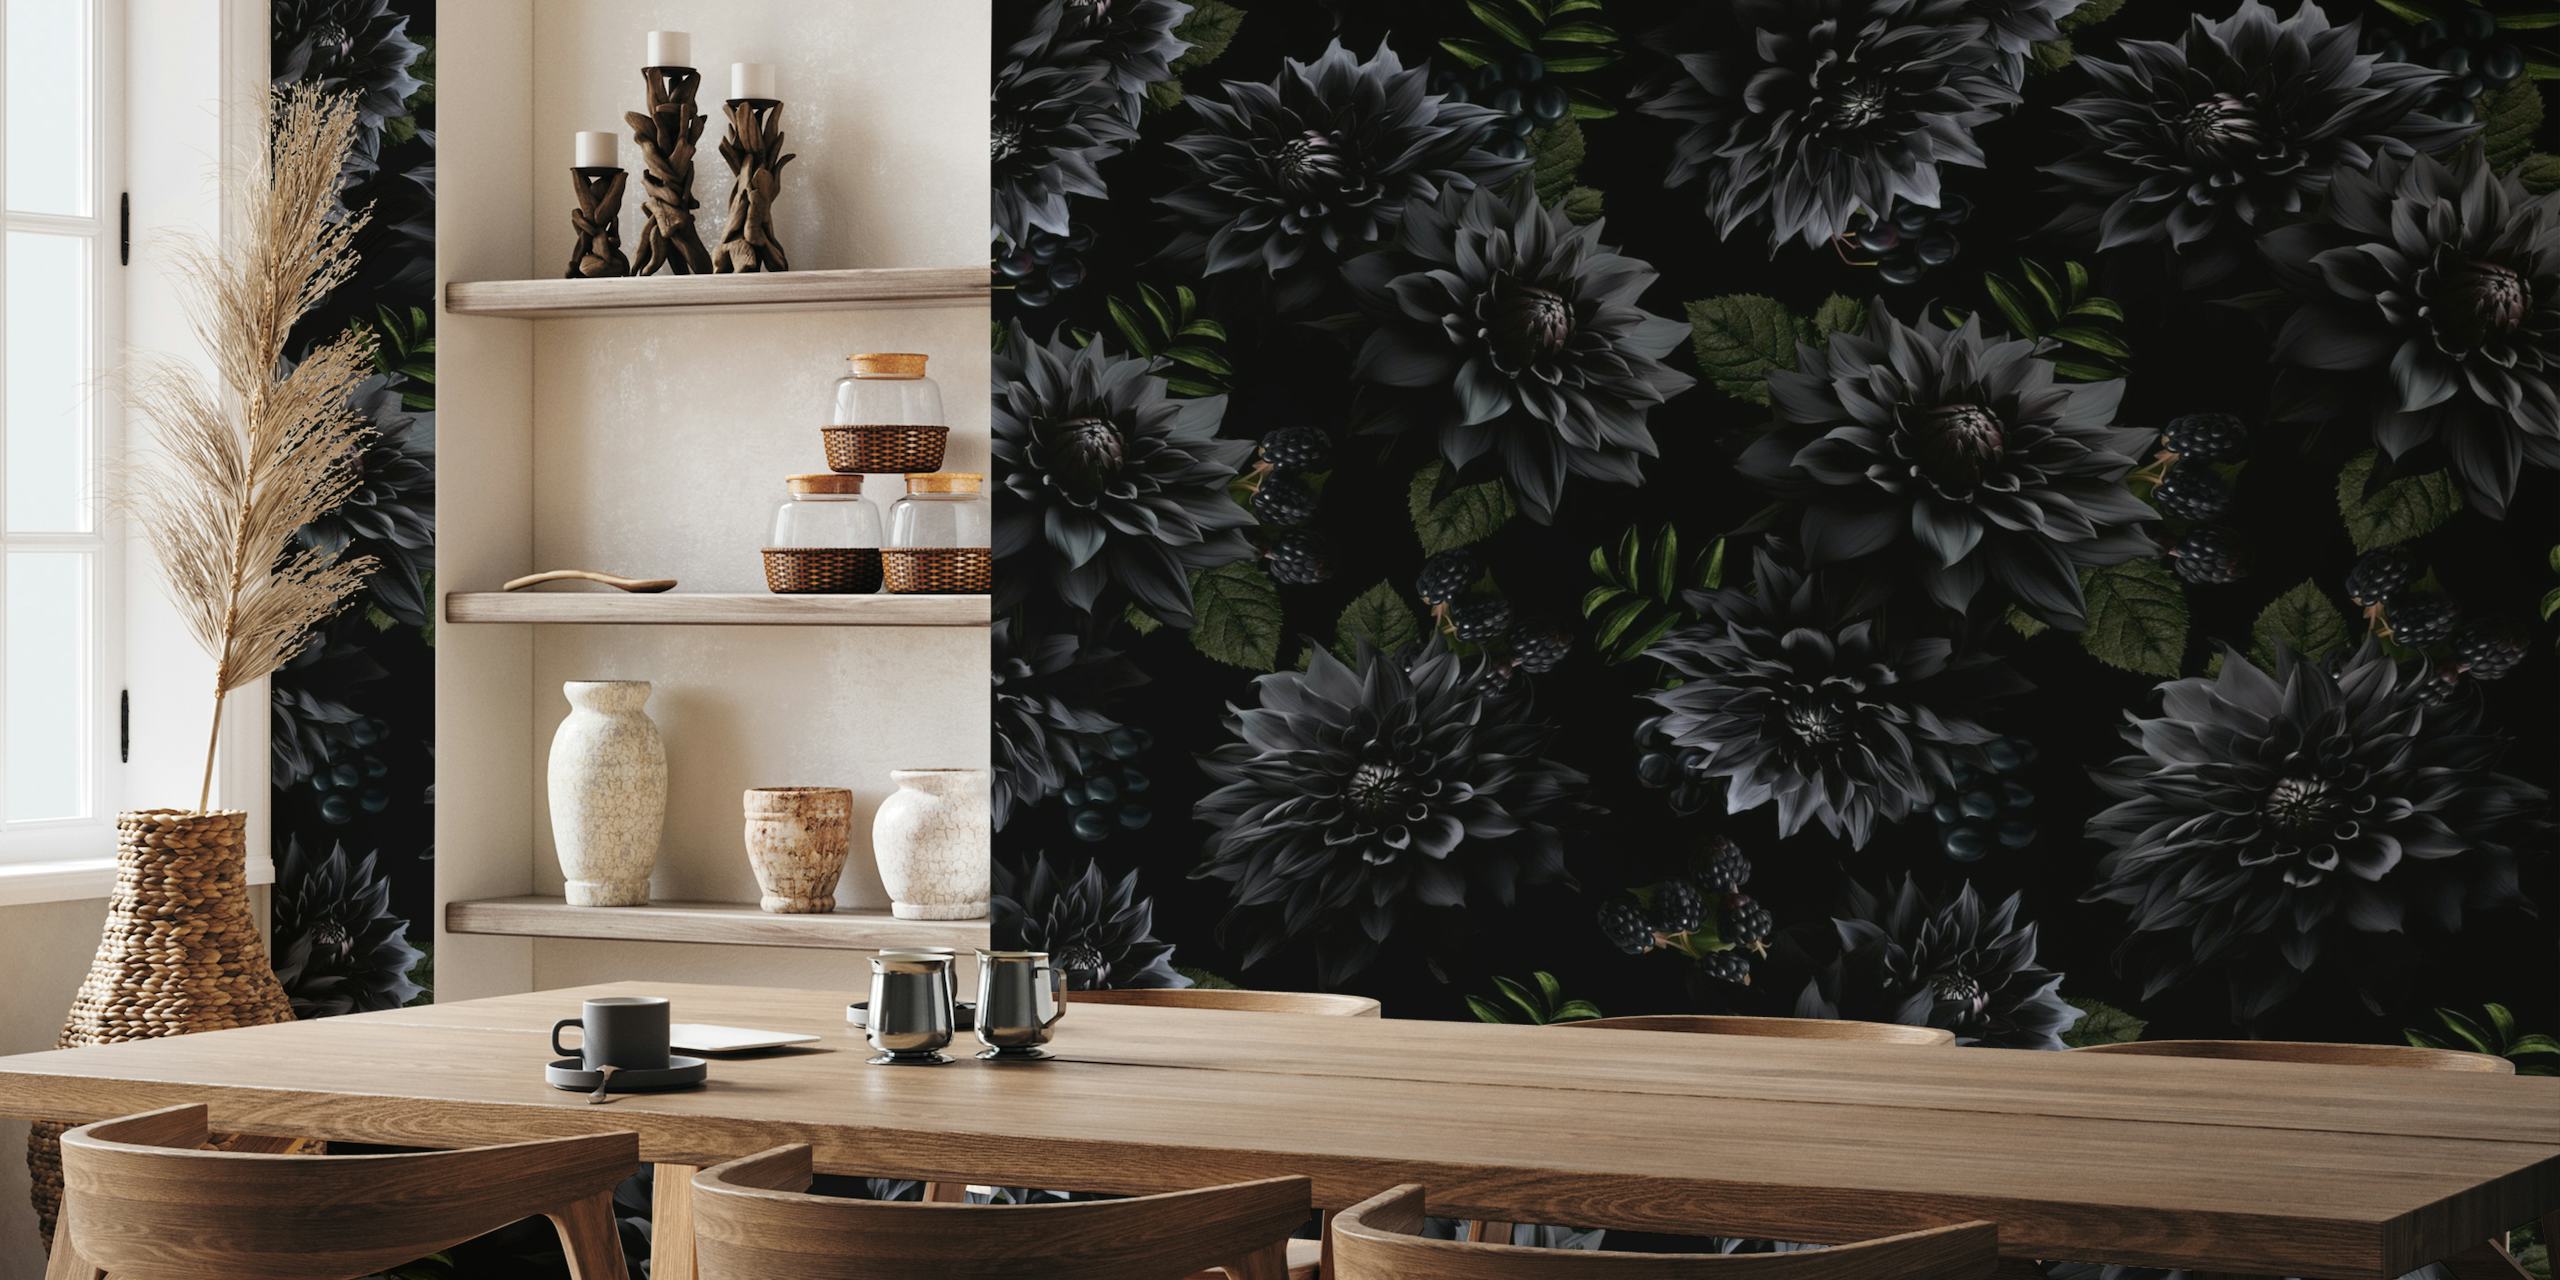 Dark gothic floral wall mural featuring sophisticated black blooms in a night garden setting